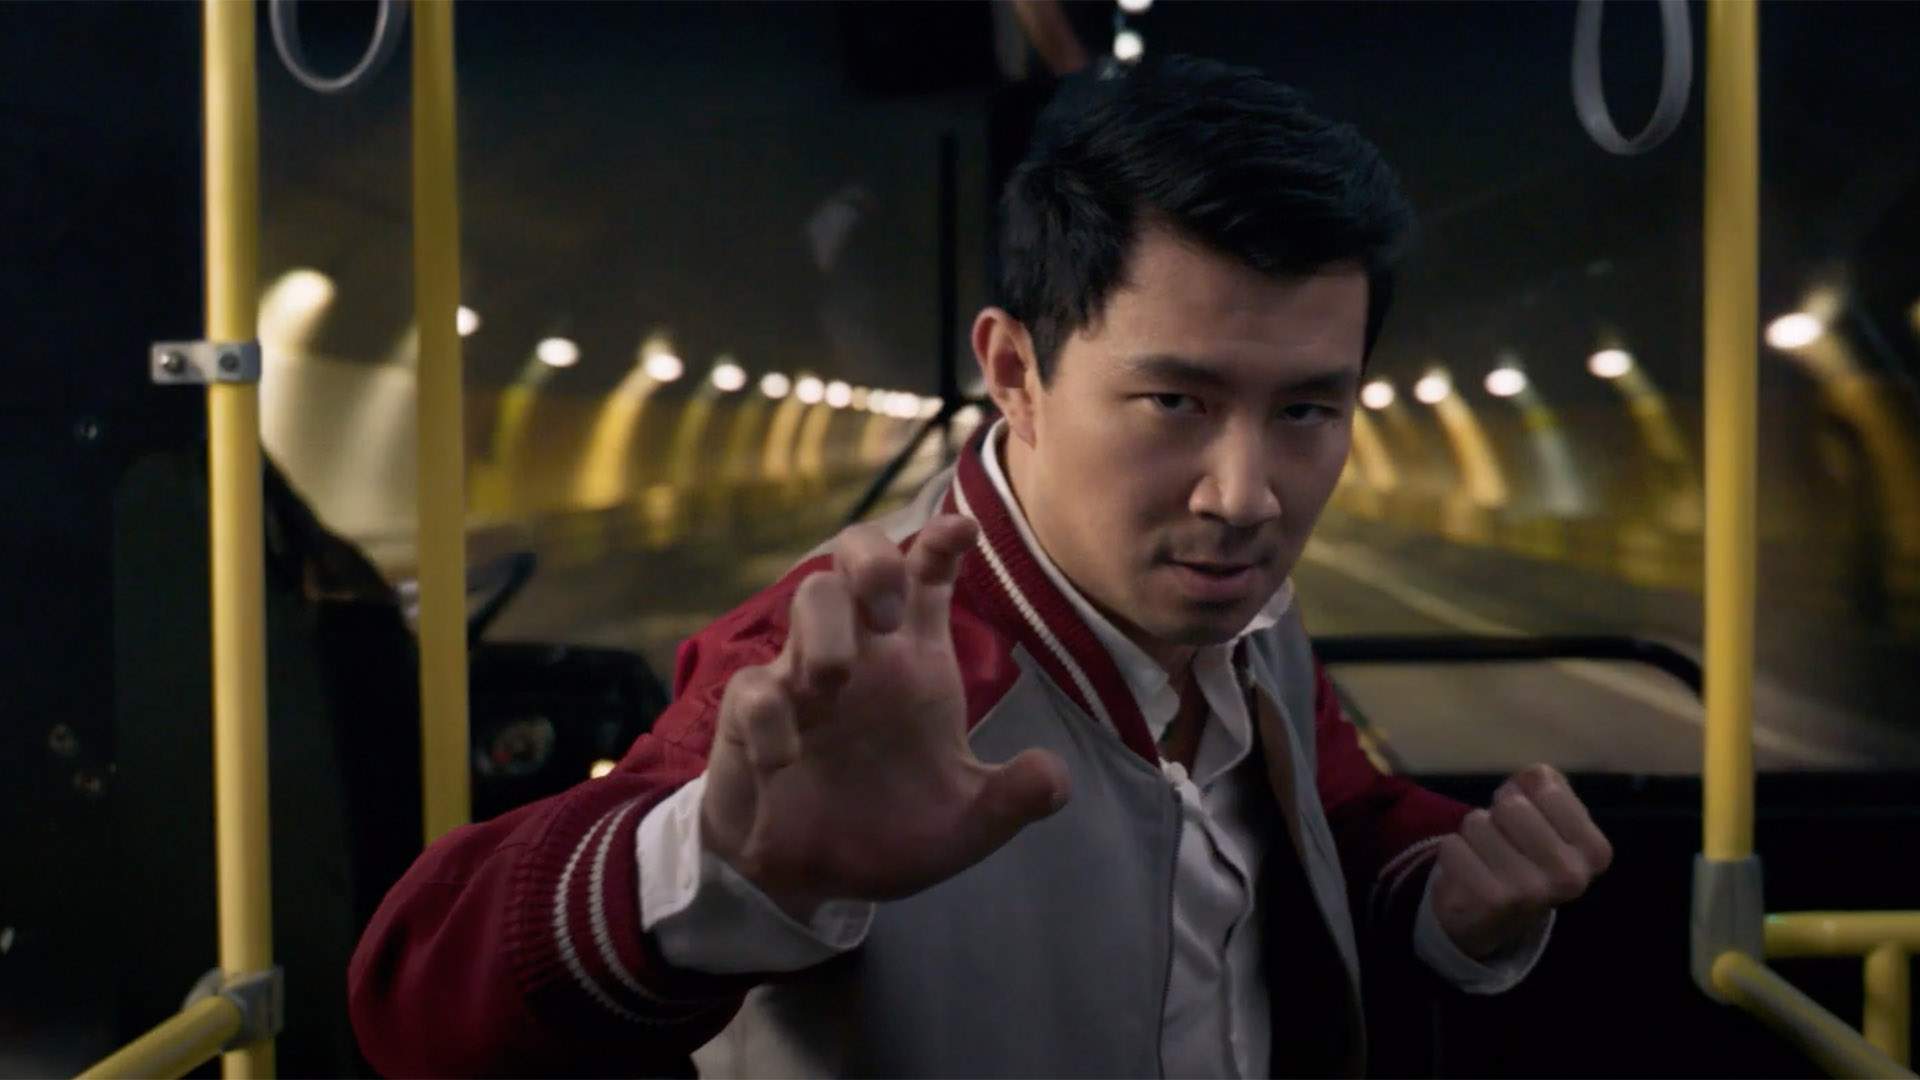 Marvel's First 'Shang-Chi and The Legend of The Ten Rings' Trailer Goes Heavy on Martial Arts Action